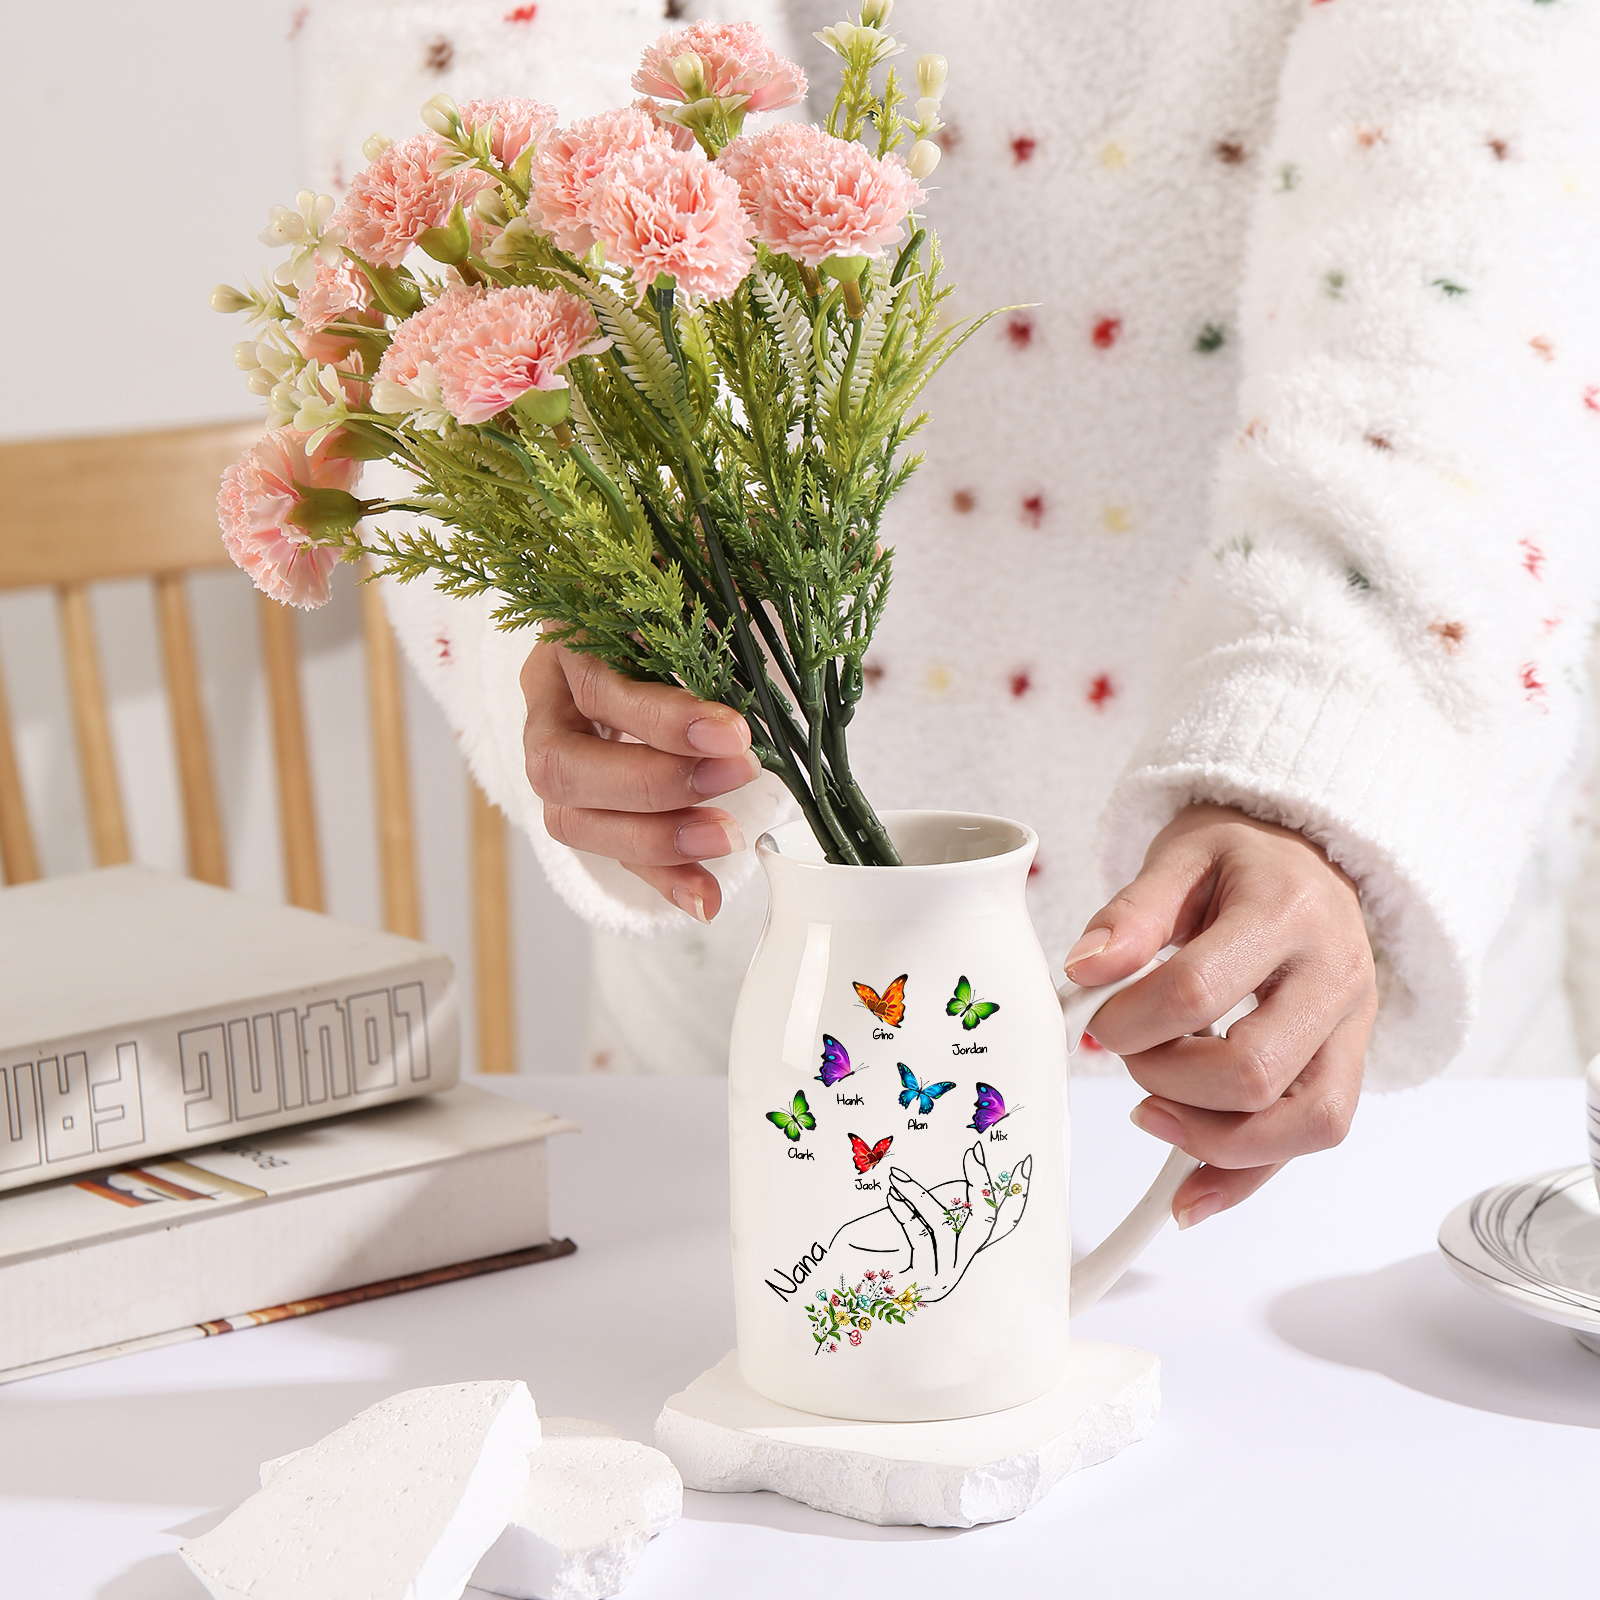 7 Names - Personalized Exquisite Flower Hand Butterfly Style Ceramic Cup With Customizable Names As a Special Gift For Nana/Mom